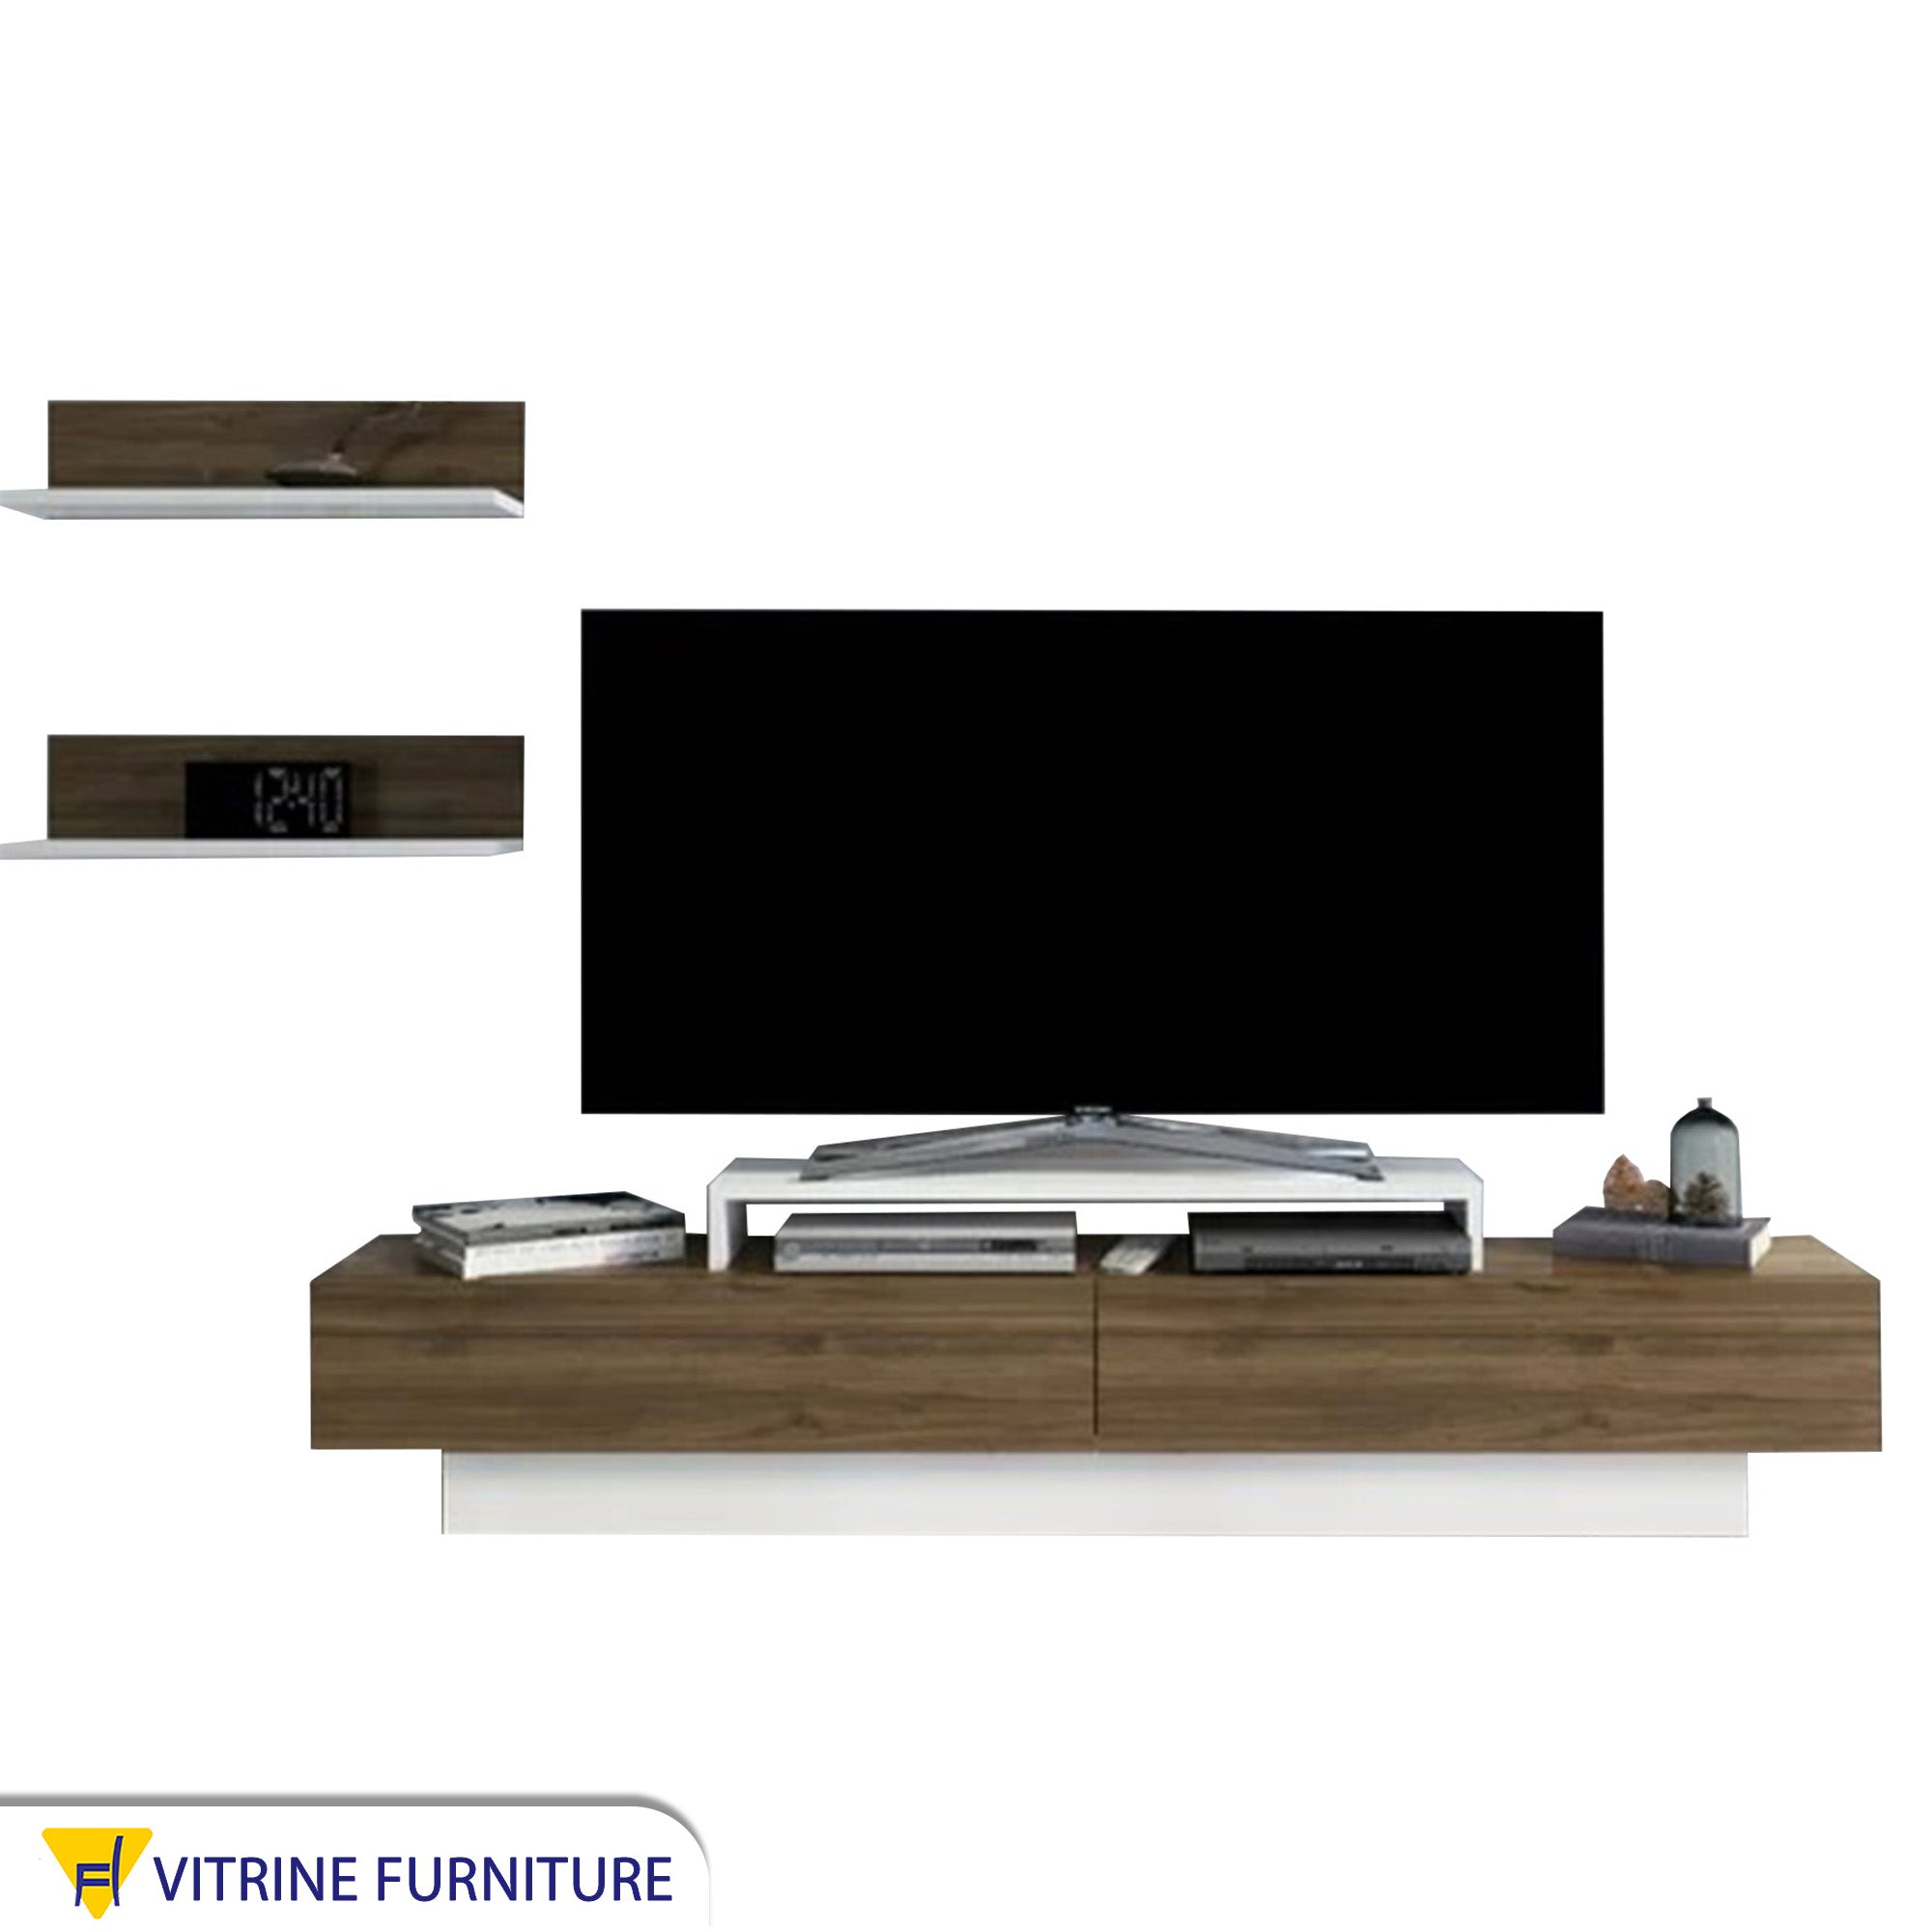 Multi-surface TV table